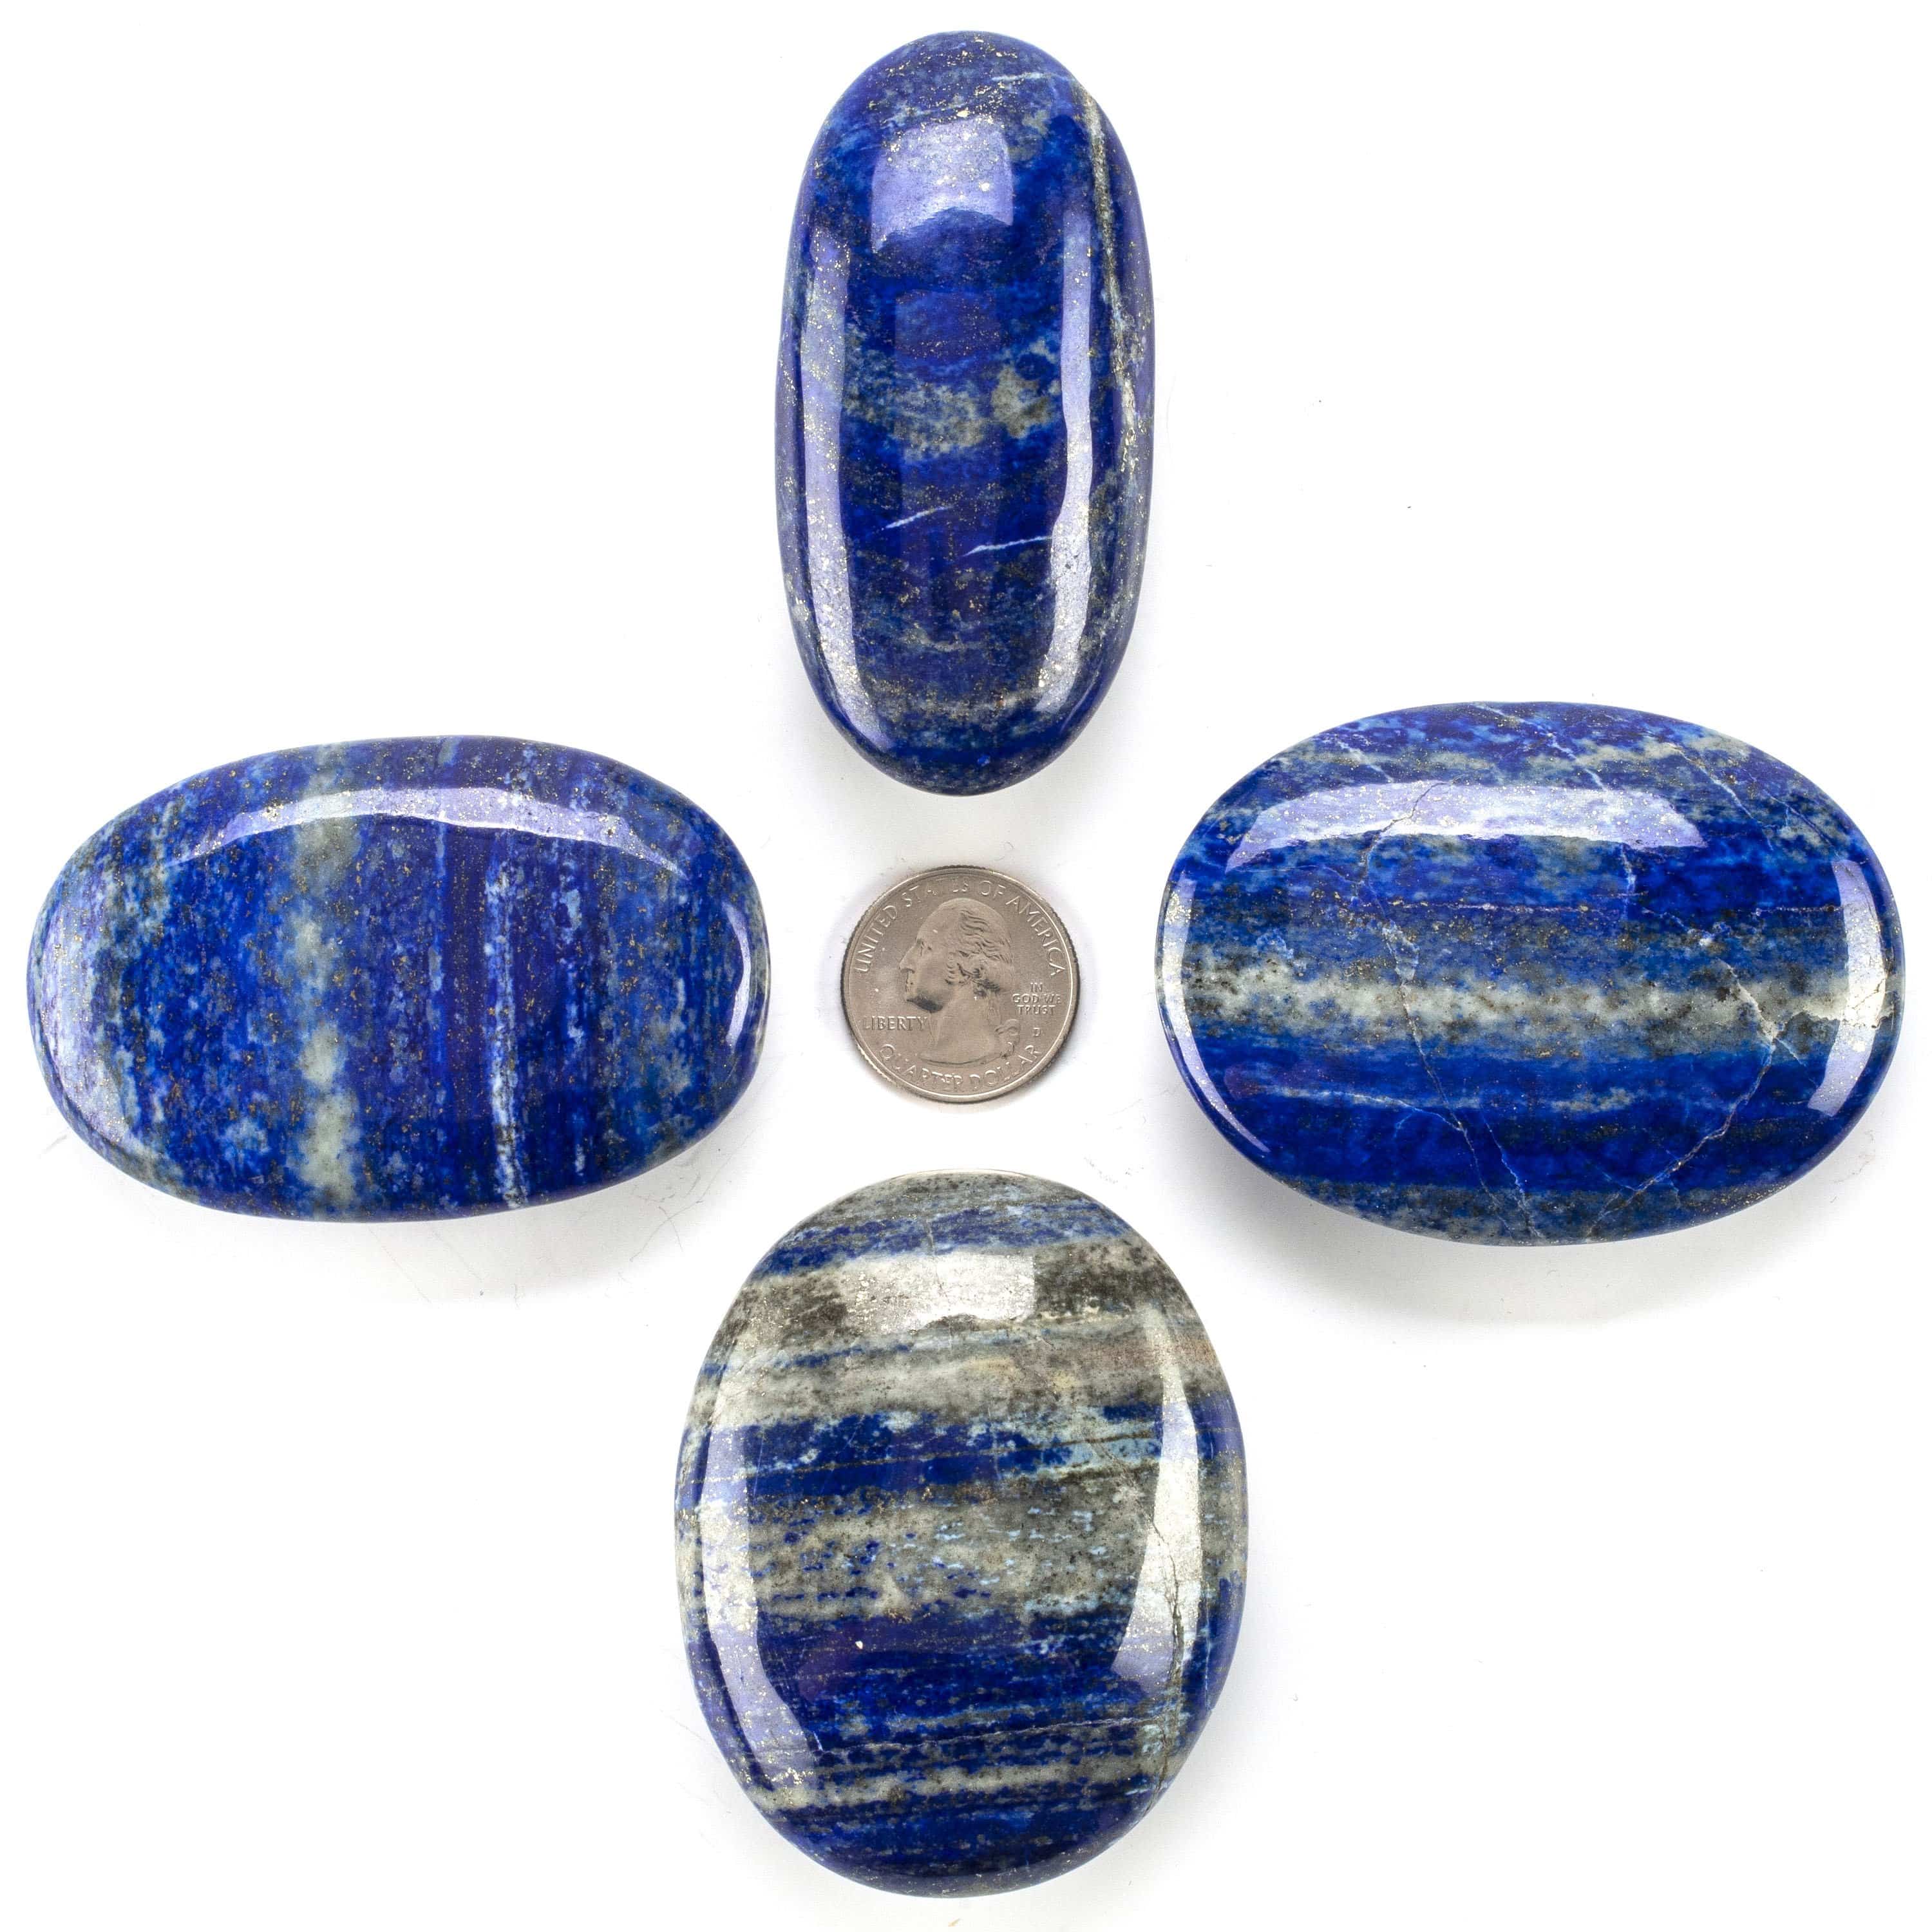 Kalifano Lapis Rare Natural Blue Lapis Lazuli Polished Palm Stone Carving from Afghanistan - 120 g LPS400.010